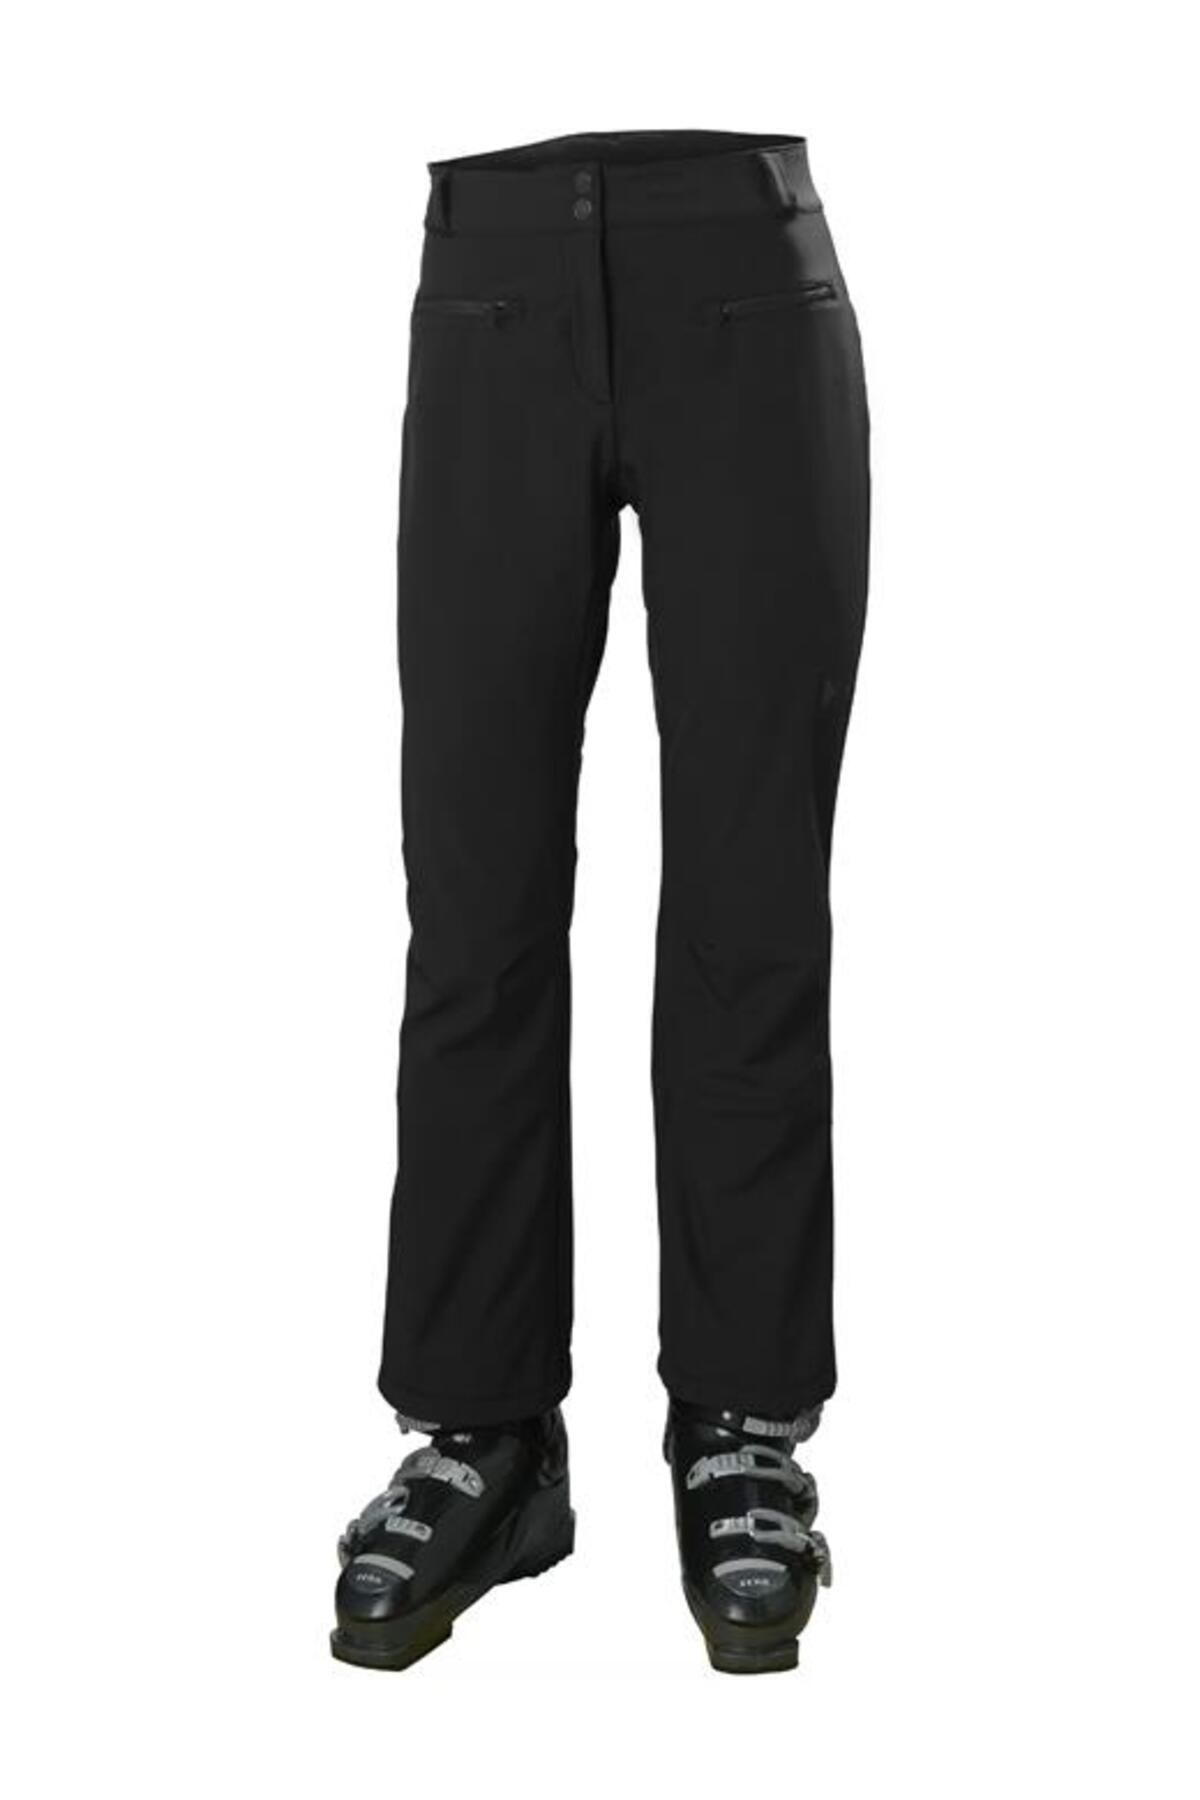 Helly Hansen HH W BELLISSIMO 2 PANT